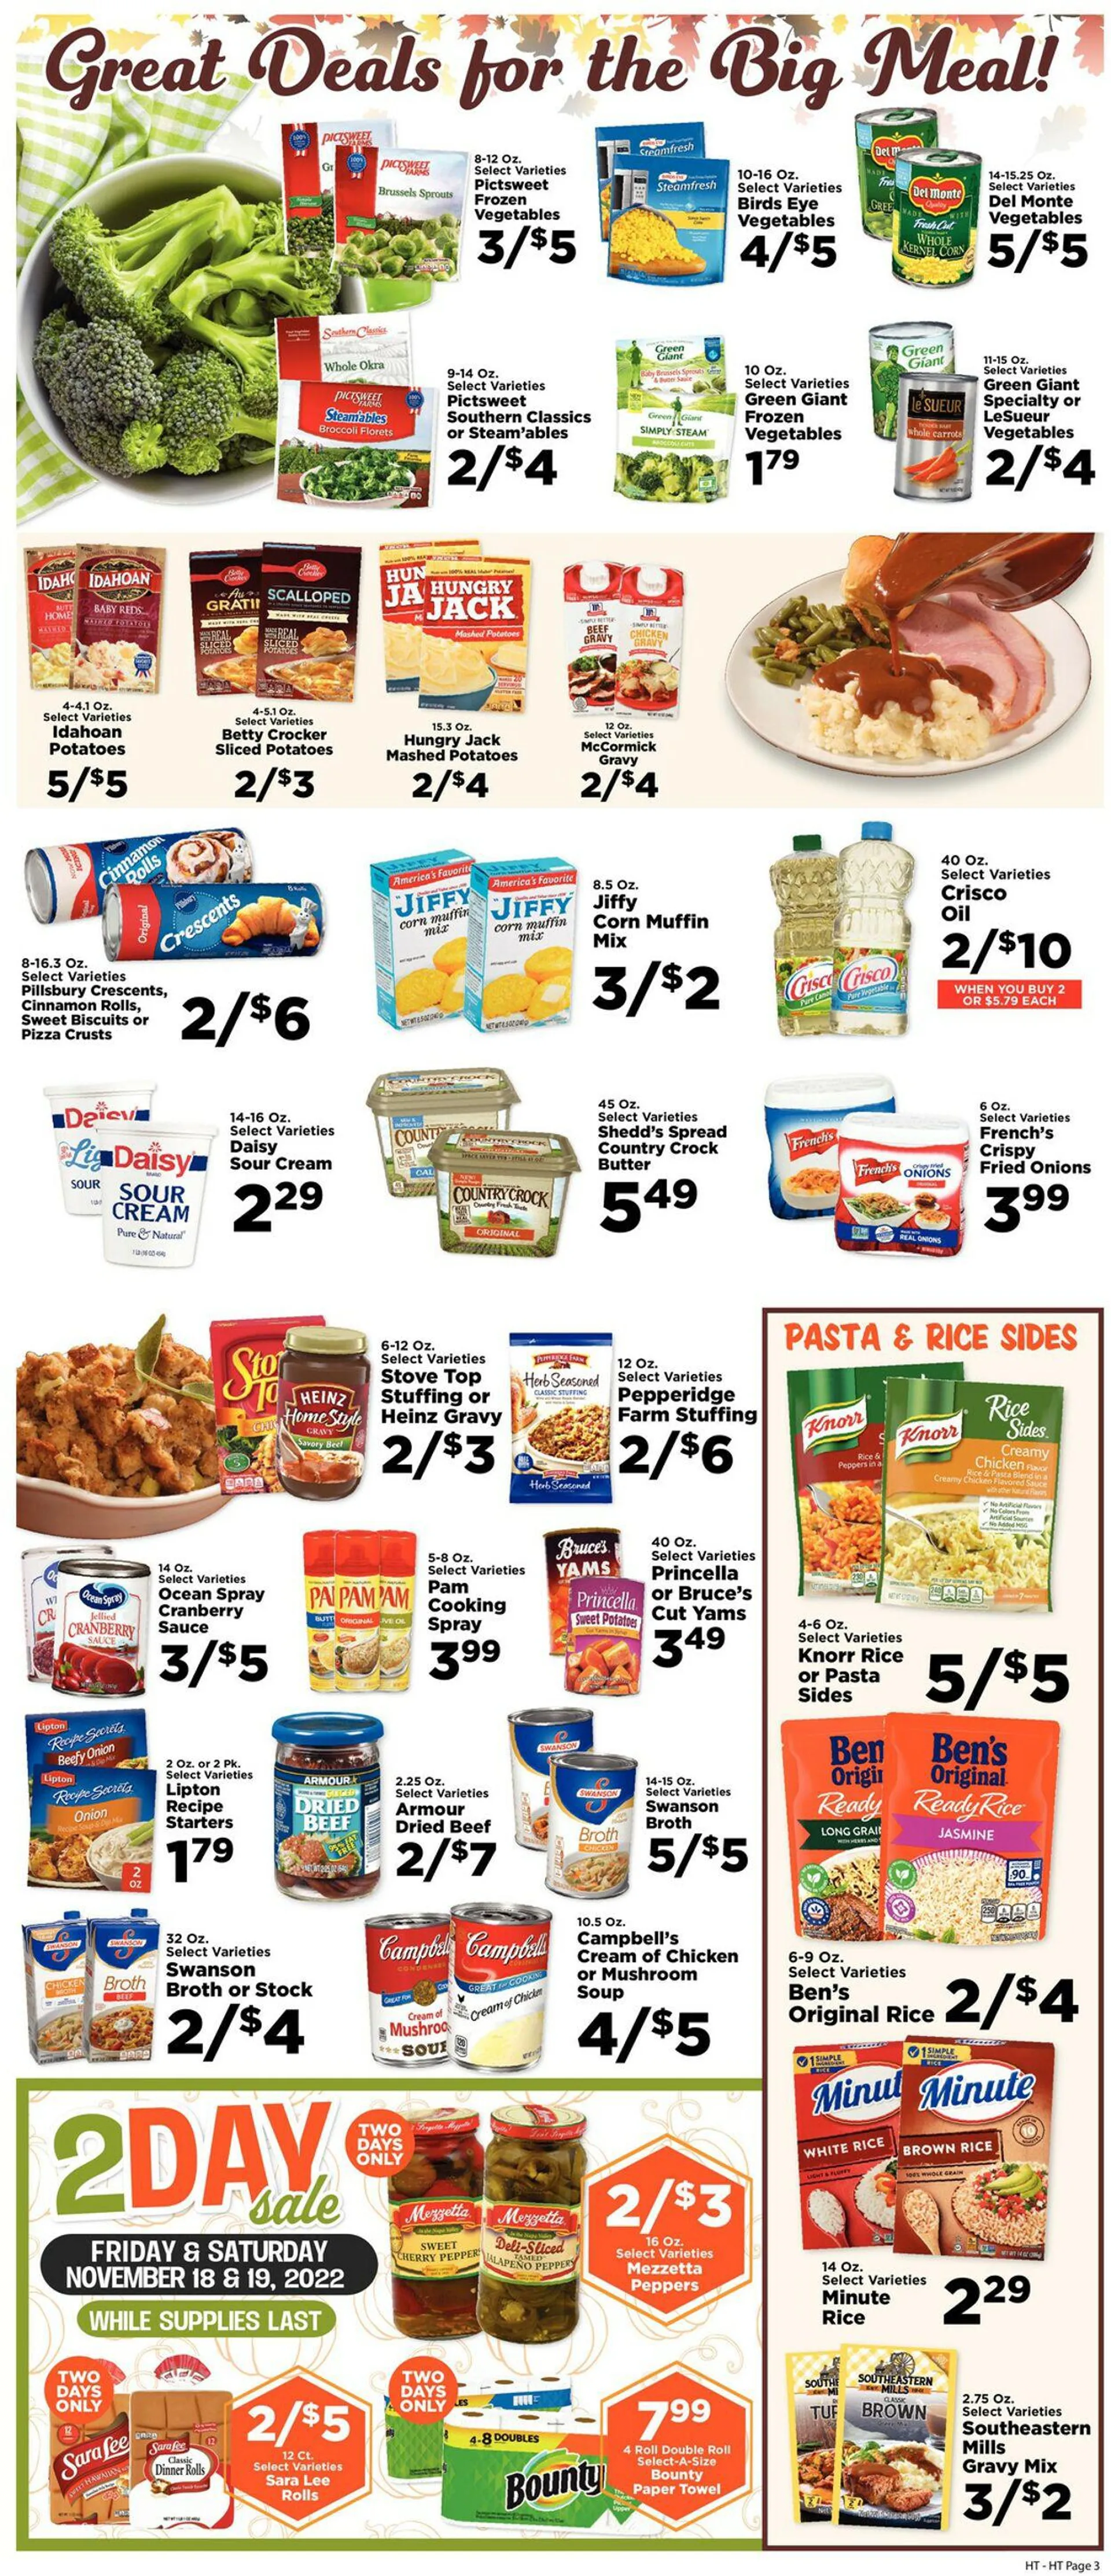 Hometown Market Current weekly ad - 3